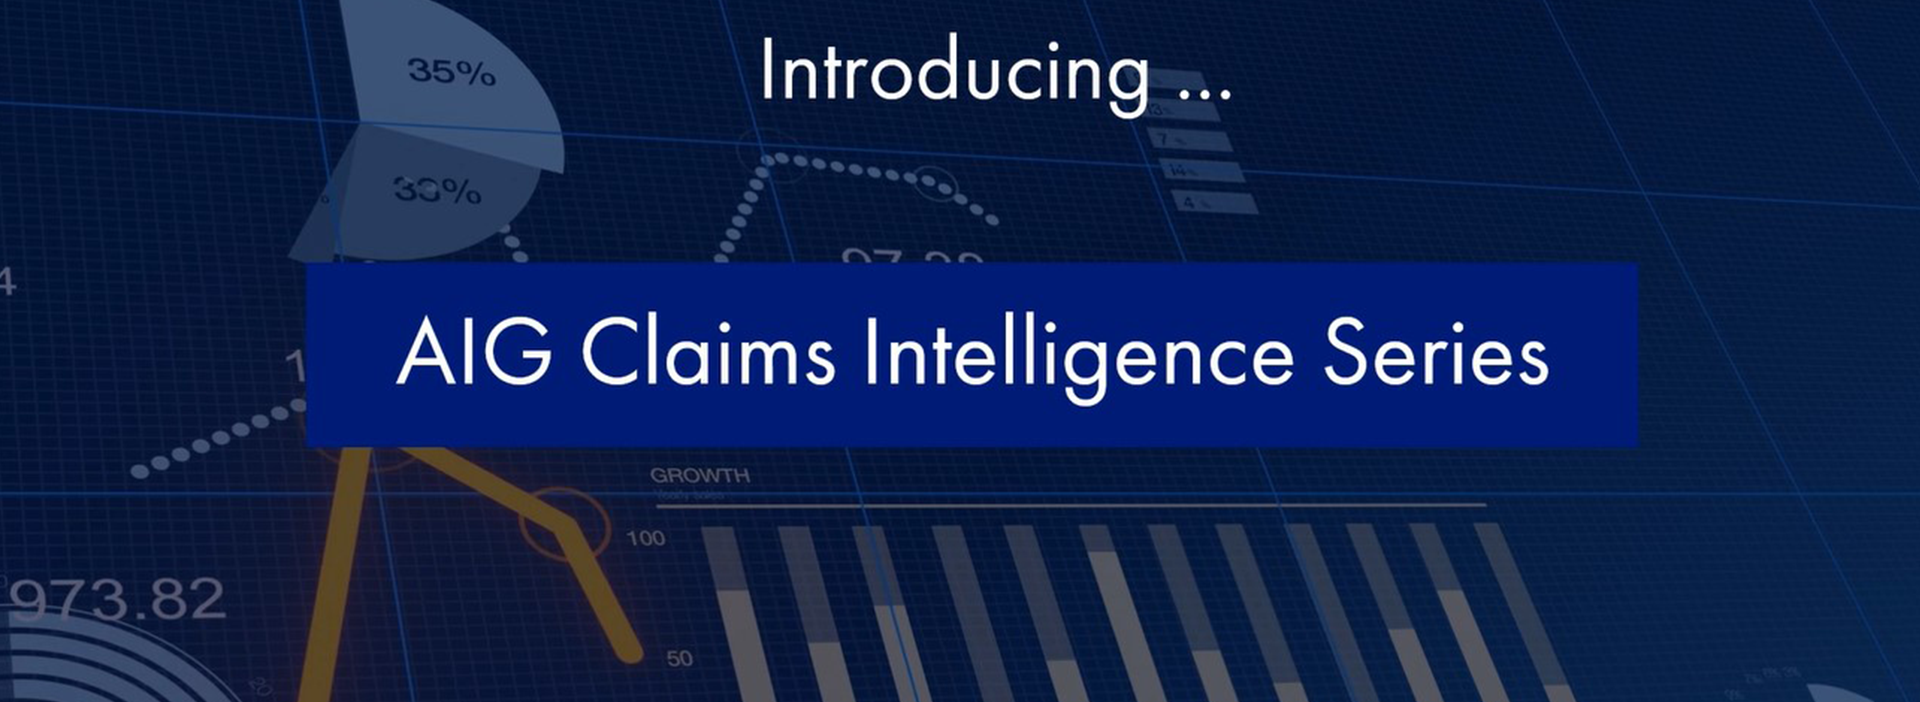 AIG Claims Intelligence Series